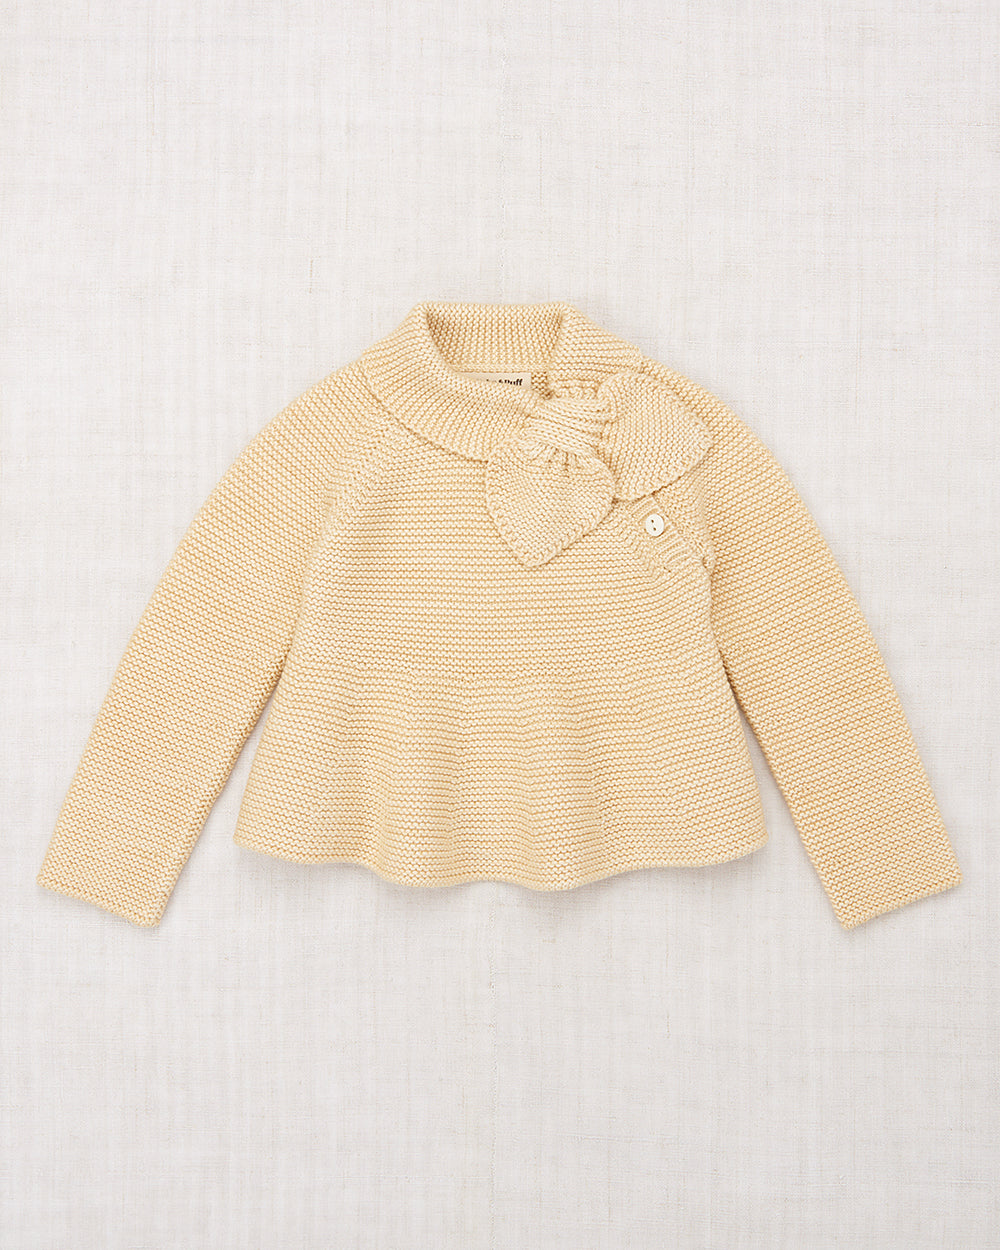 misha&puff Bow Scout Sweater 4y-